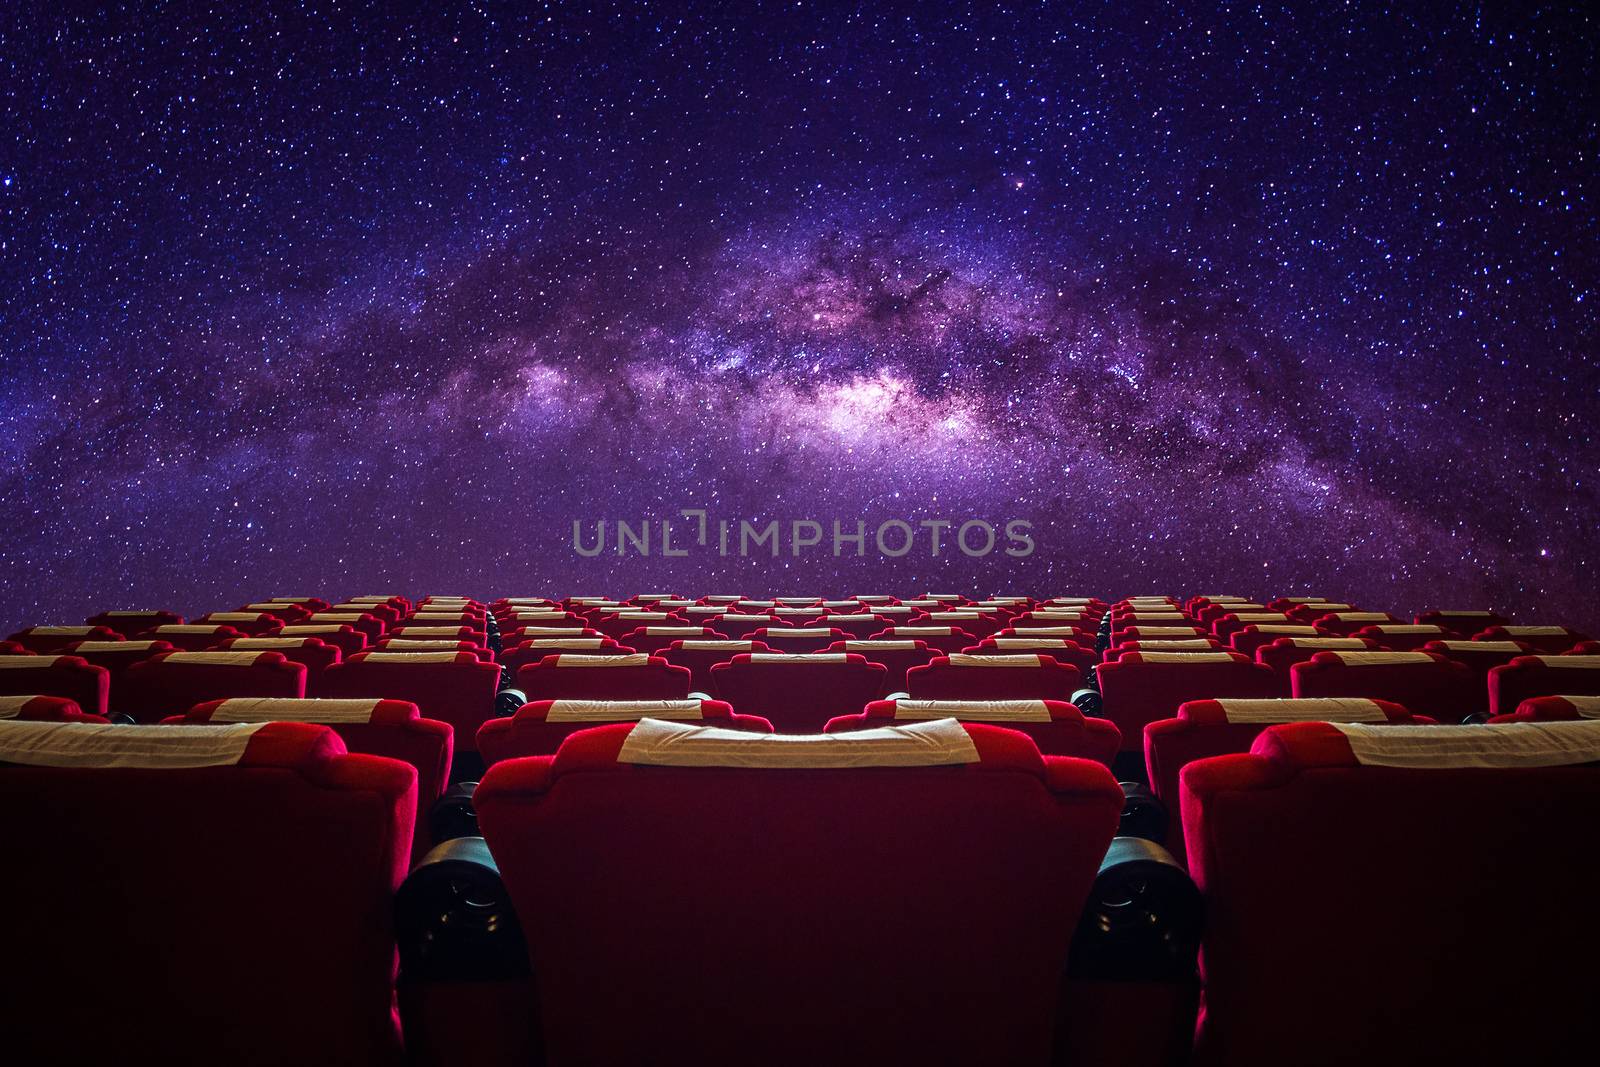 Cinema hall with red seat in Milky way galaxy. by gutarphotoghaphy